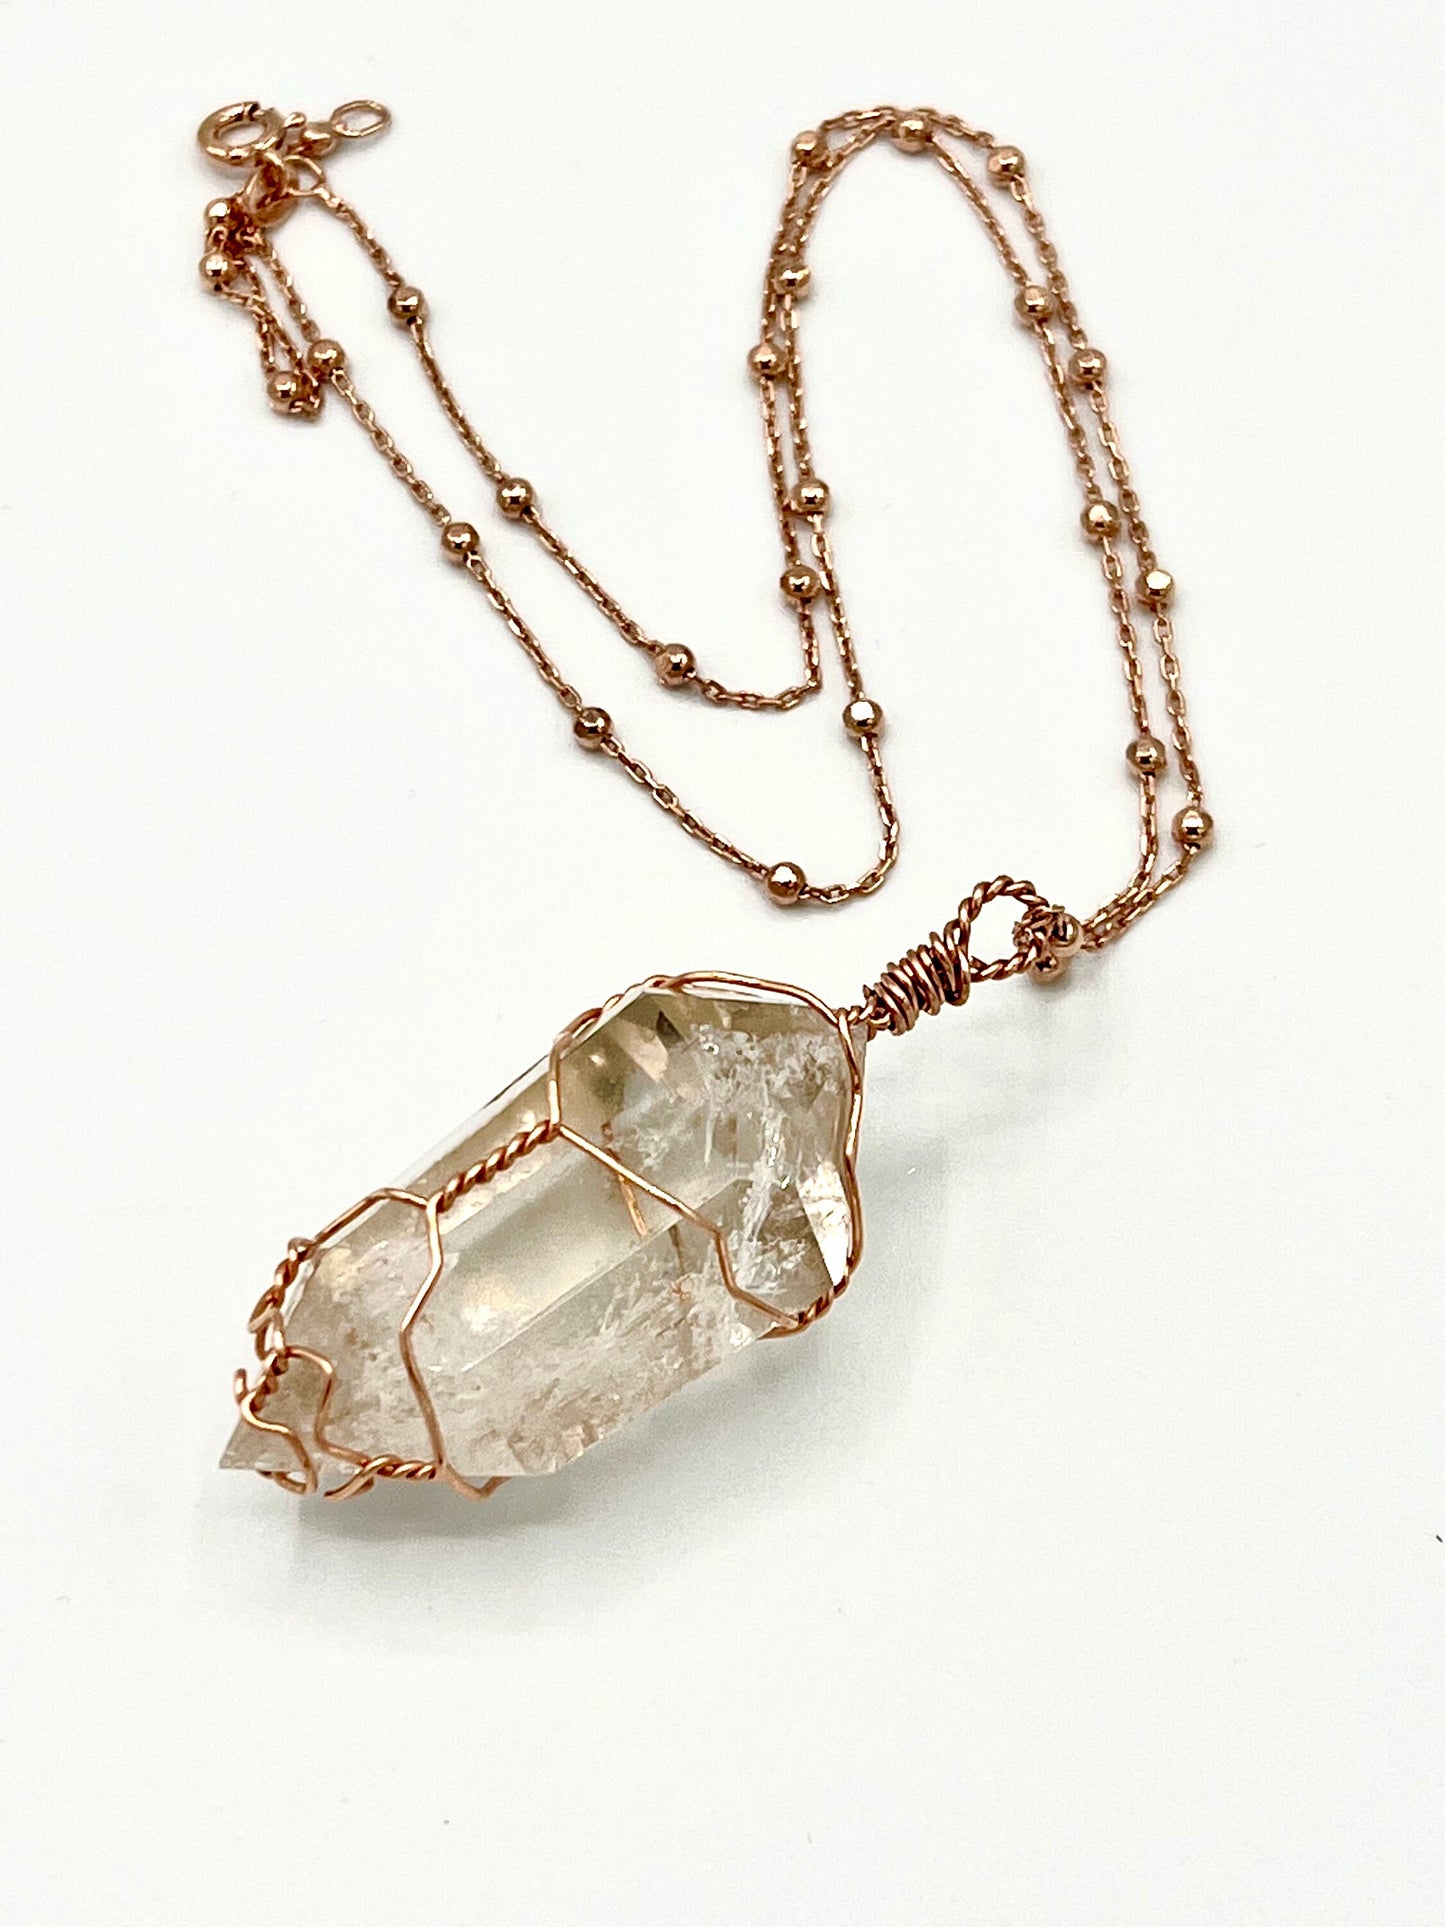 Clear Quartz Crystal Pendant Necklace Point wired Healing stone Gemstone Rose gold silver